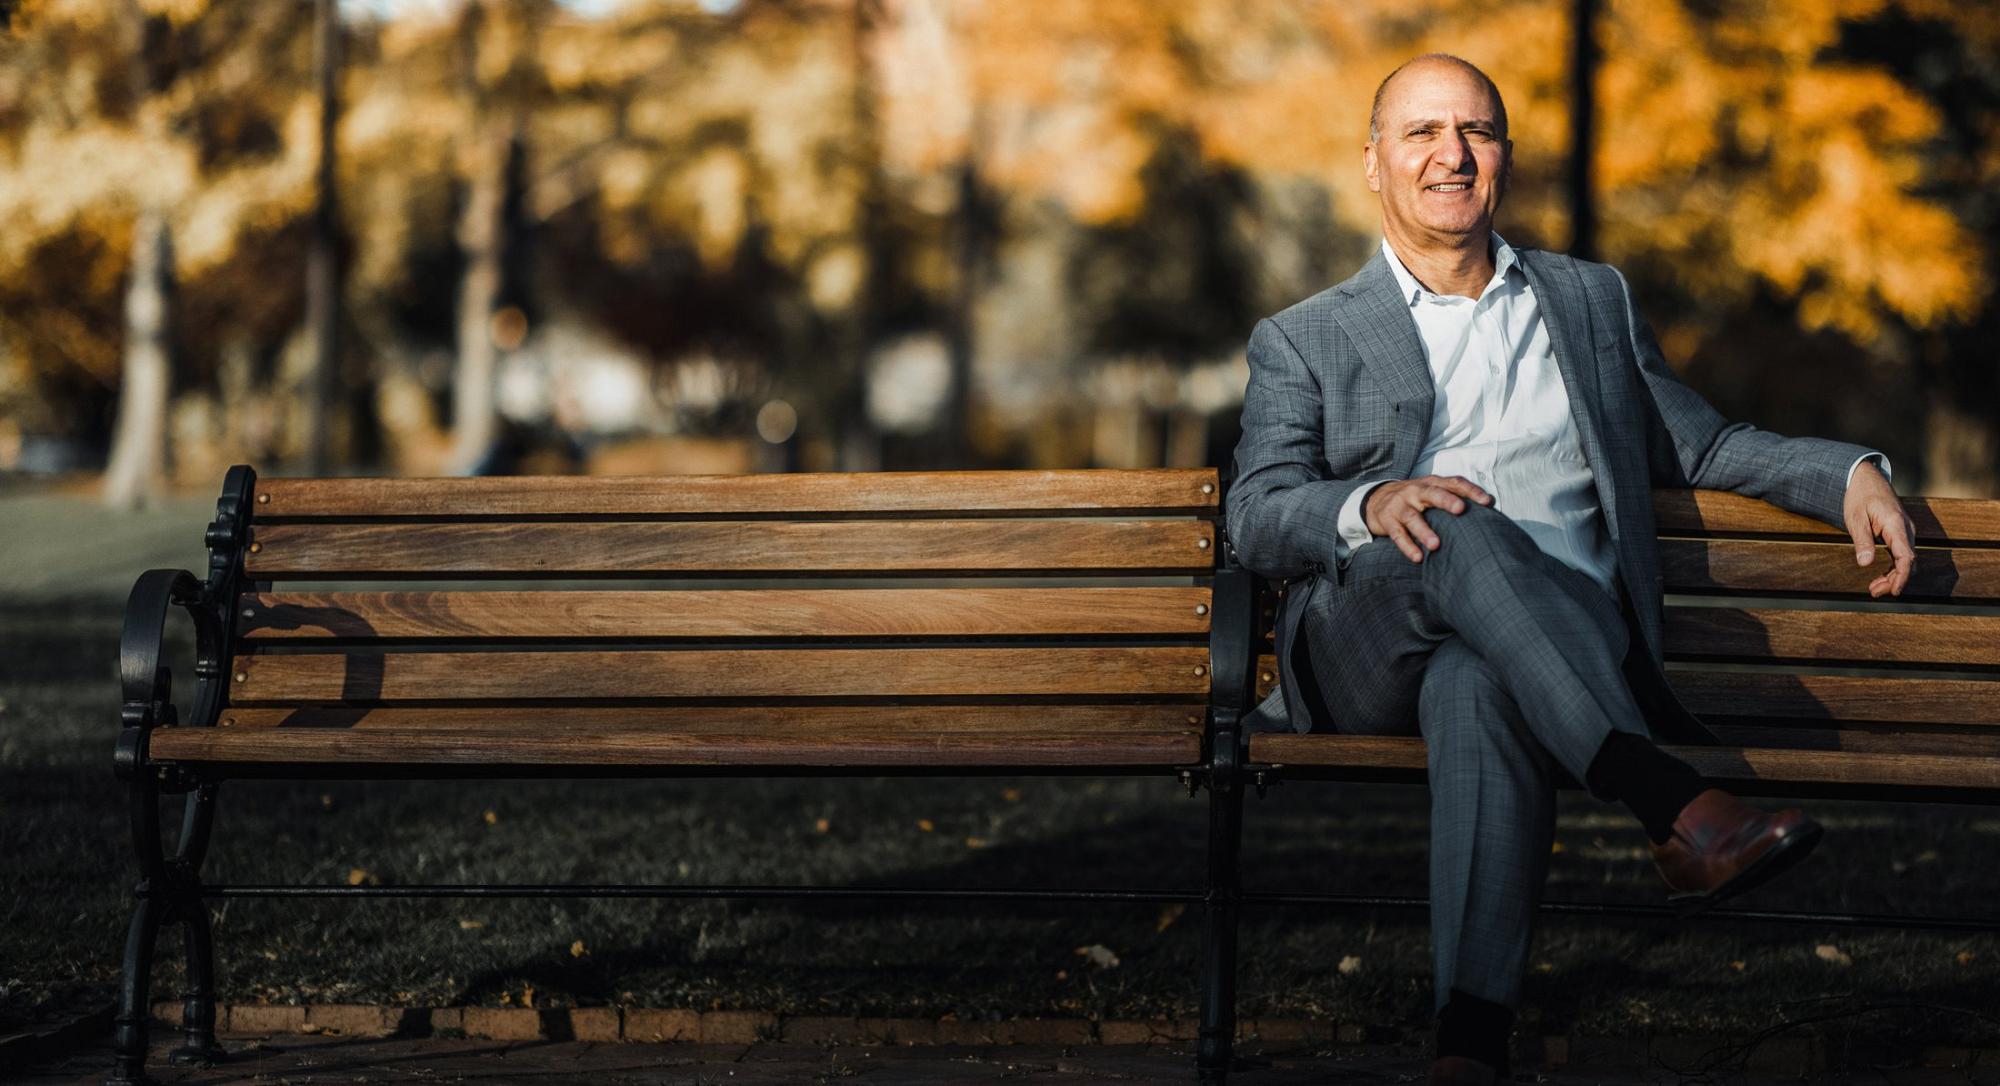 Dr. Russo - Boston Plastic Surgeon, sitting on a bench, smiling